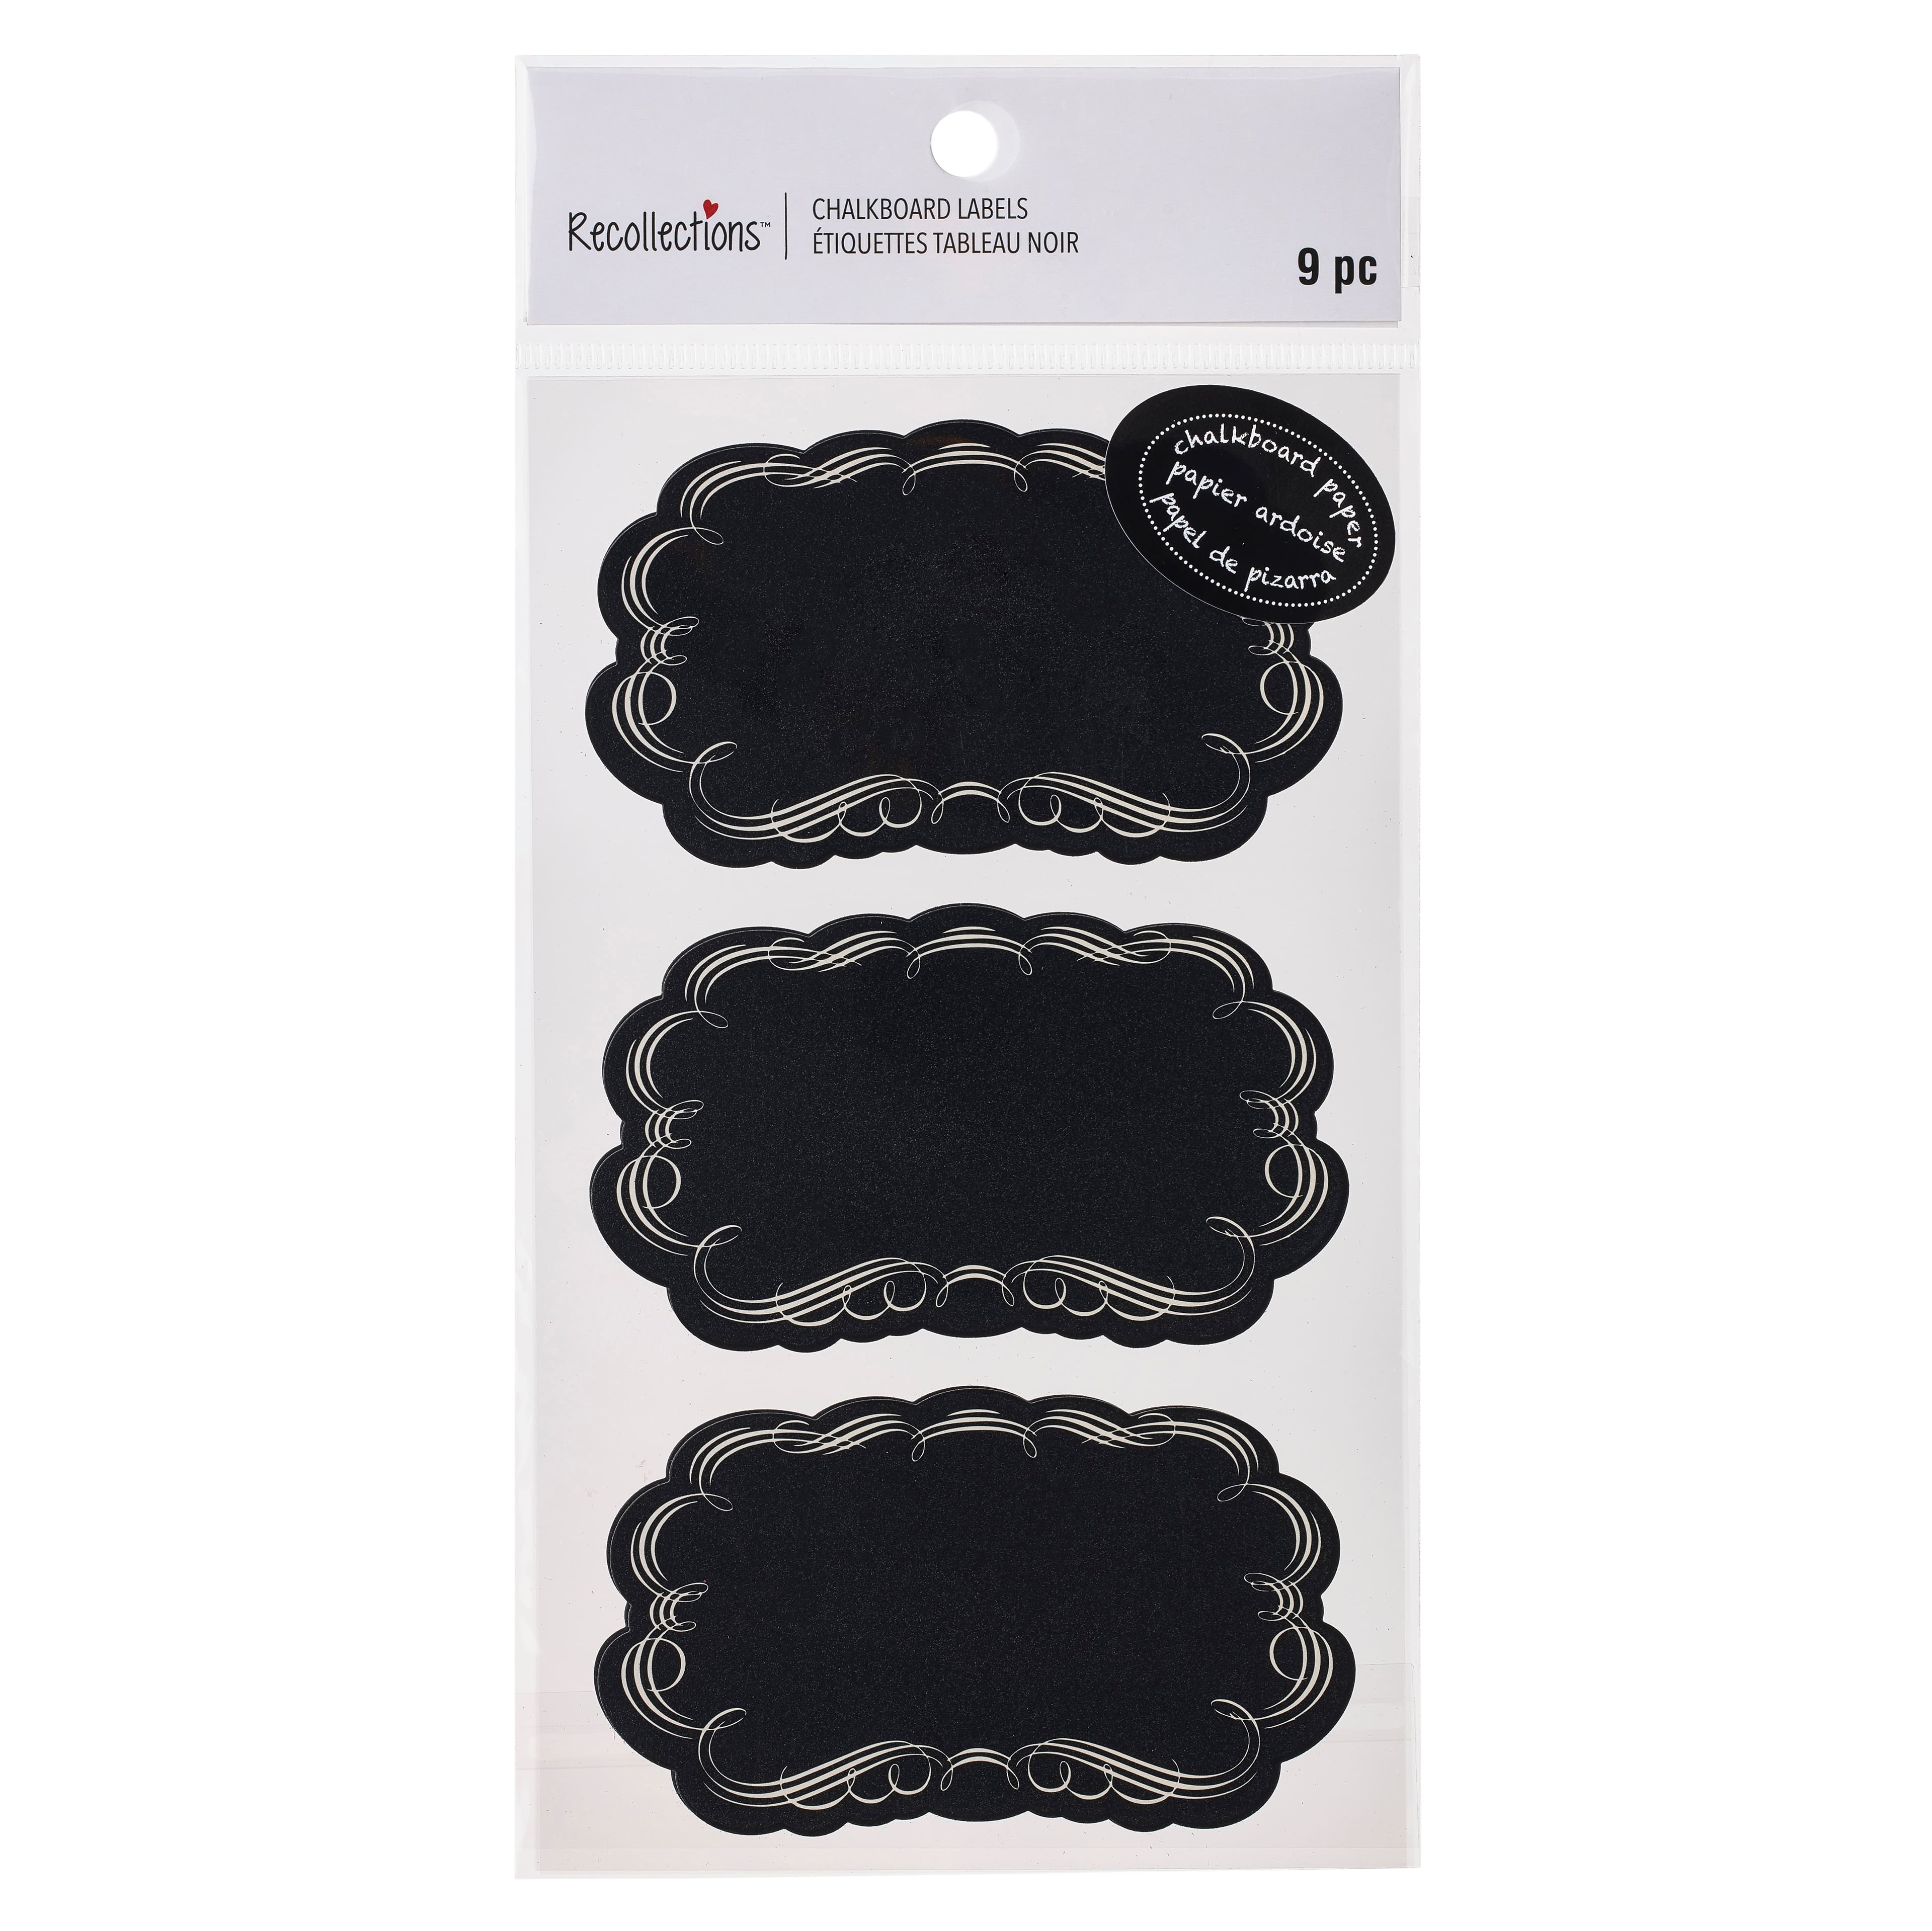 Recollections Chalkboard Labels - Each